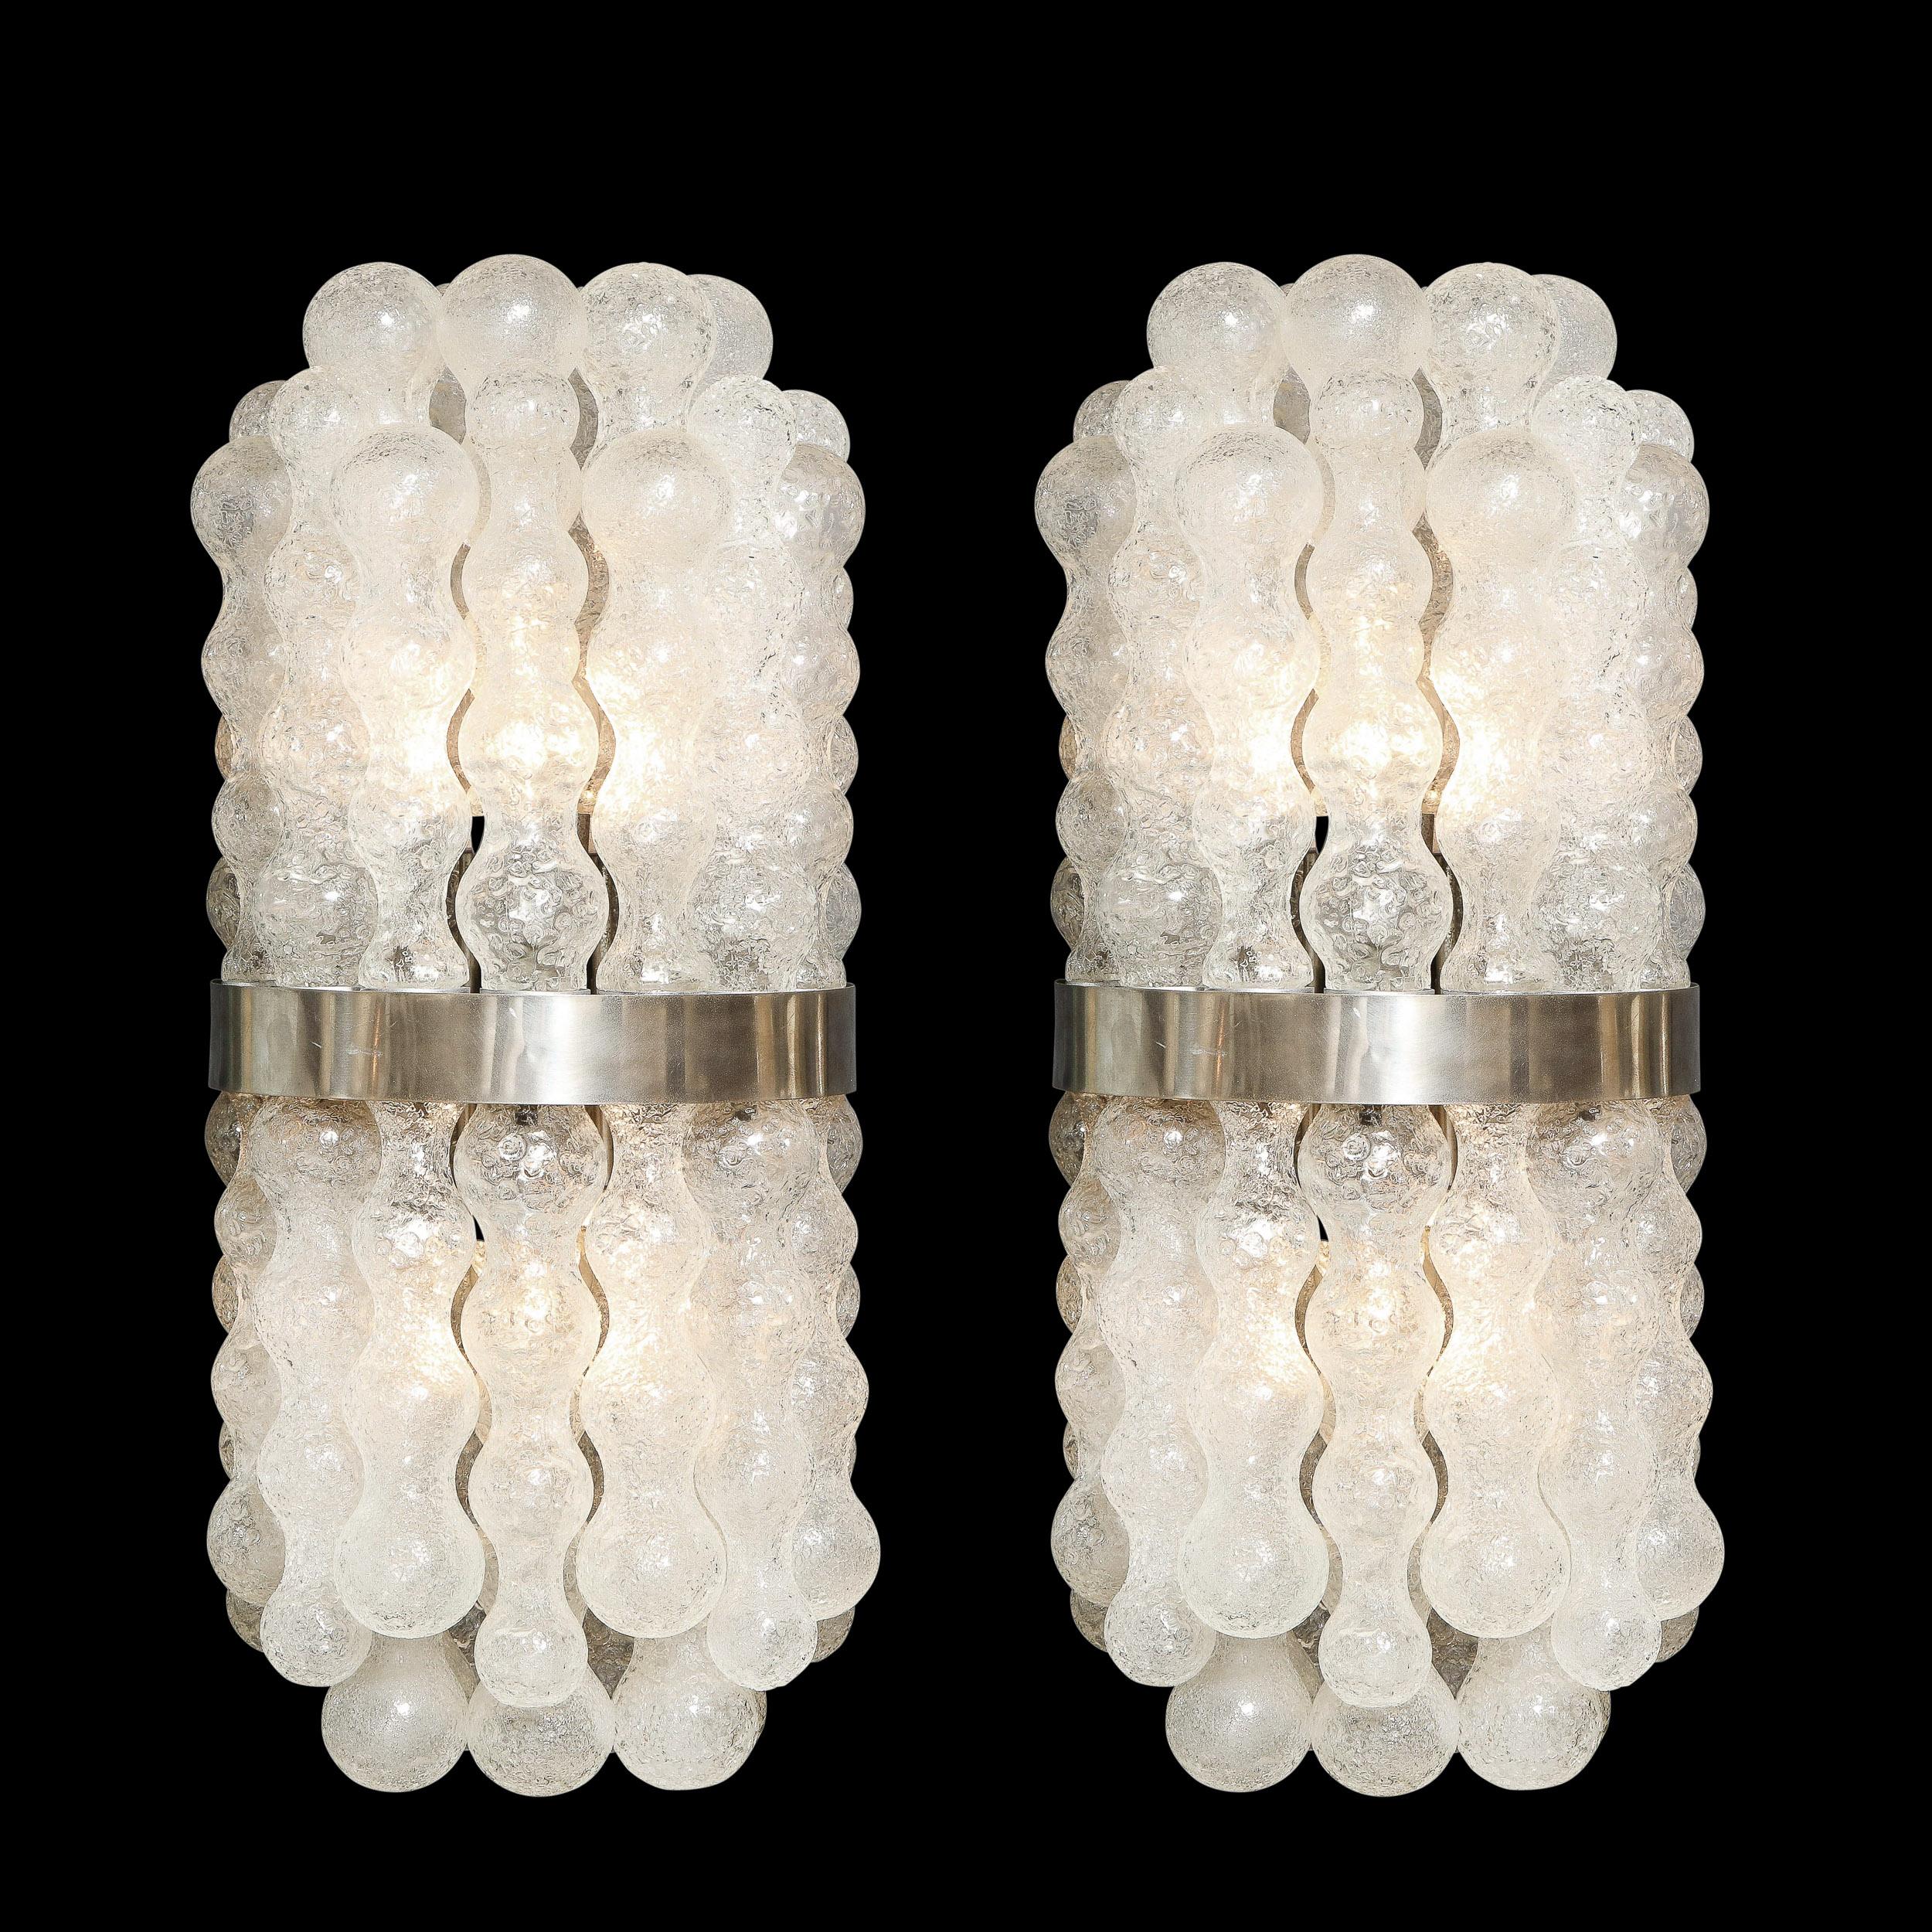 This sophisticated and stunning pair of Mid Century Modern sconces were realized in Murano, Italy- the island off the coast of Venice renowned for centuries for its superlative glass production. They feature bowed bodies composed of a wealth of